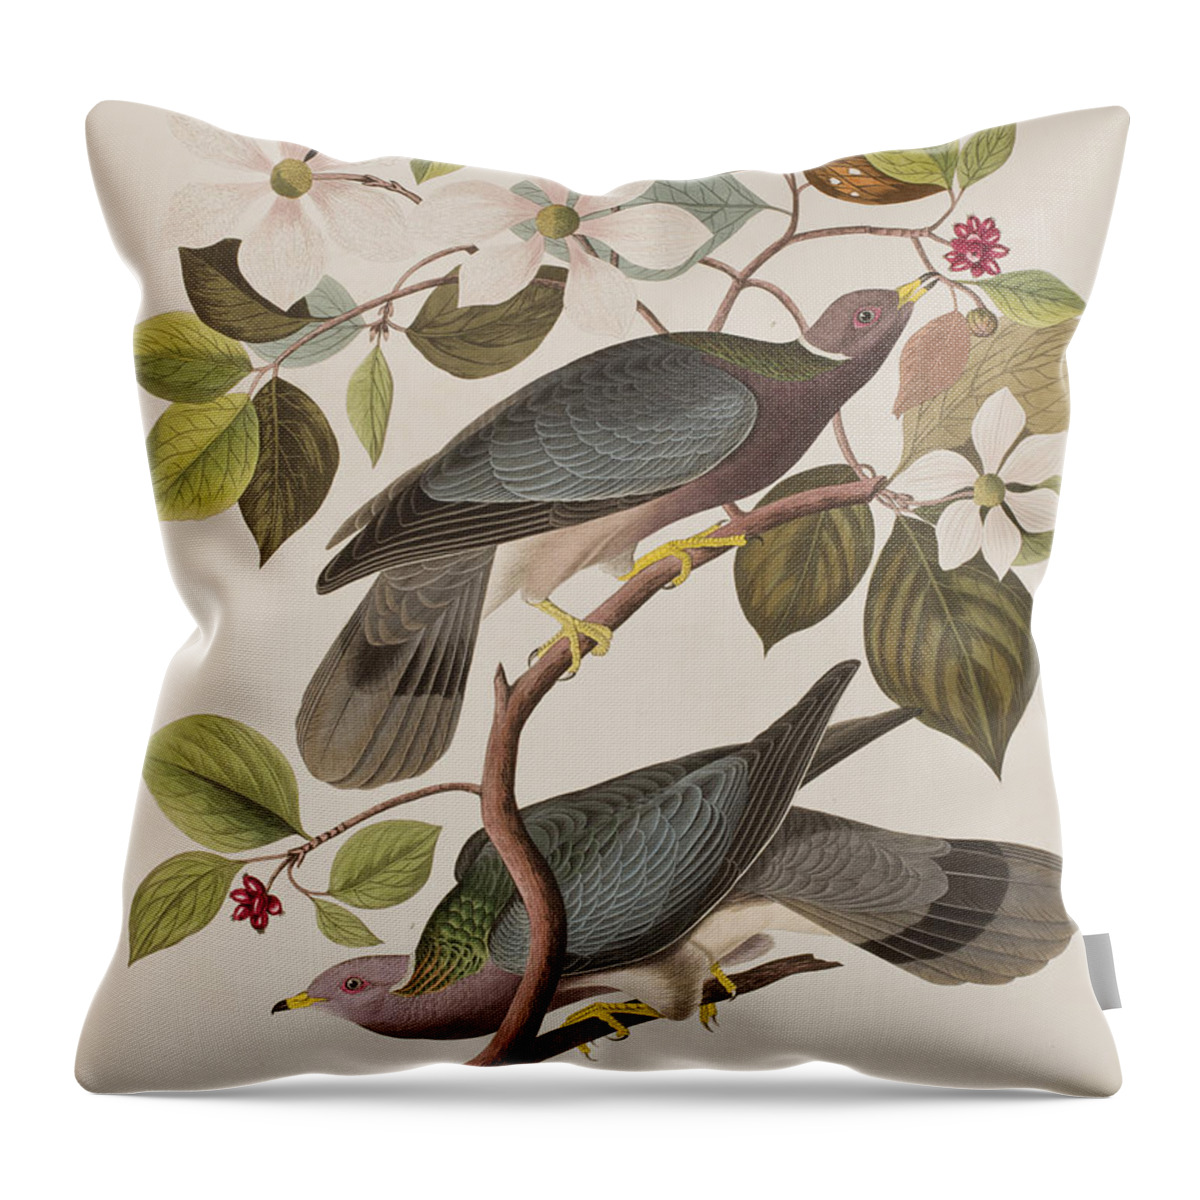 Pigeon Throw Pillow featuring the painting Band-tailed Pigeon by John James Audubon